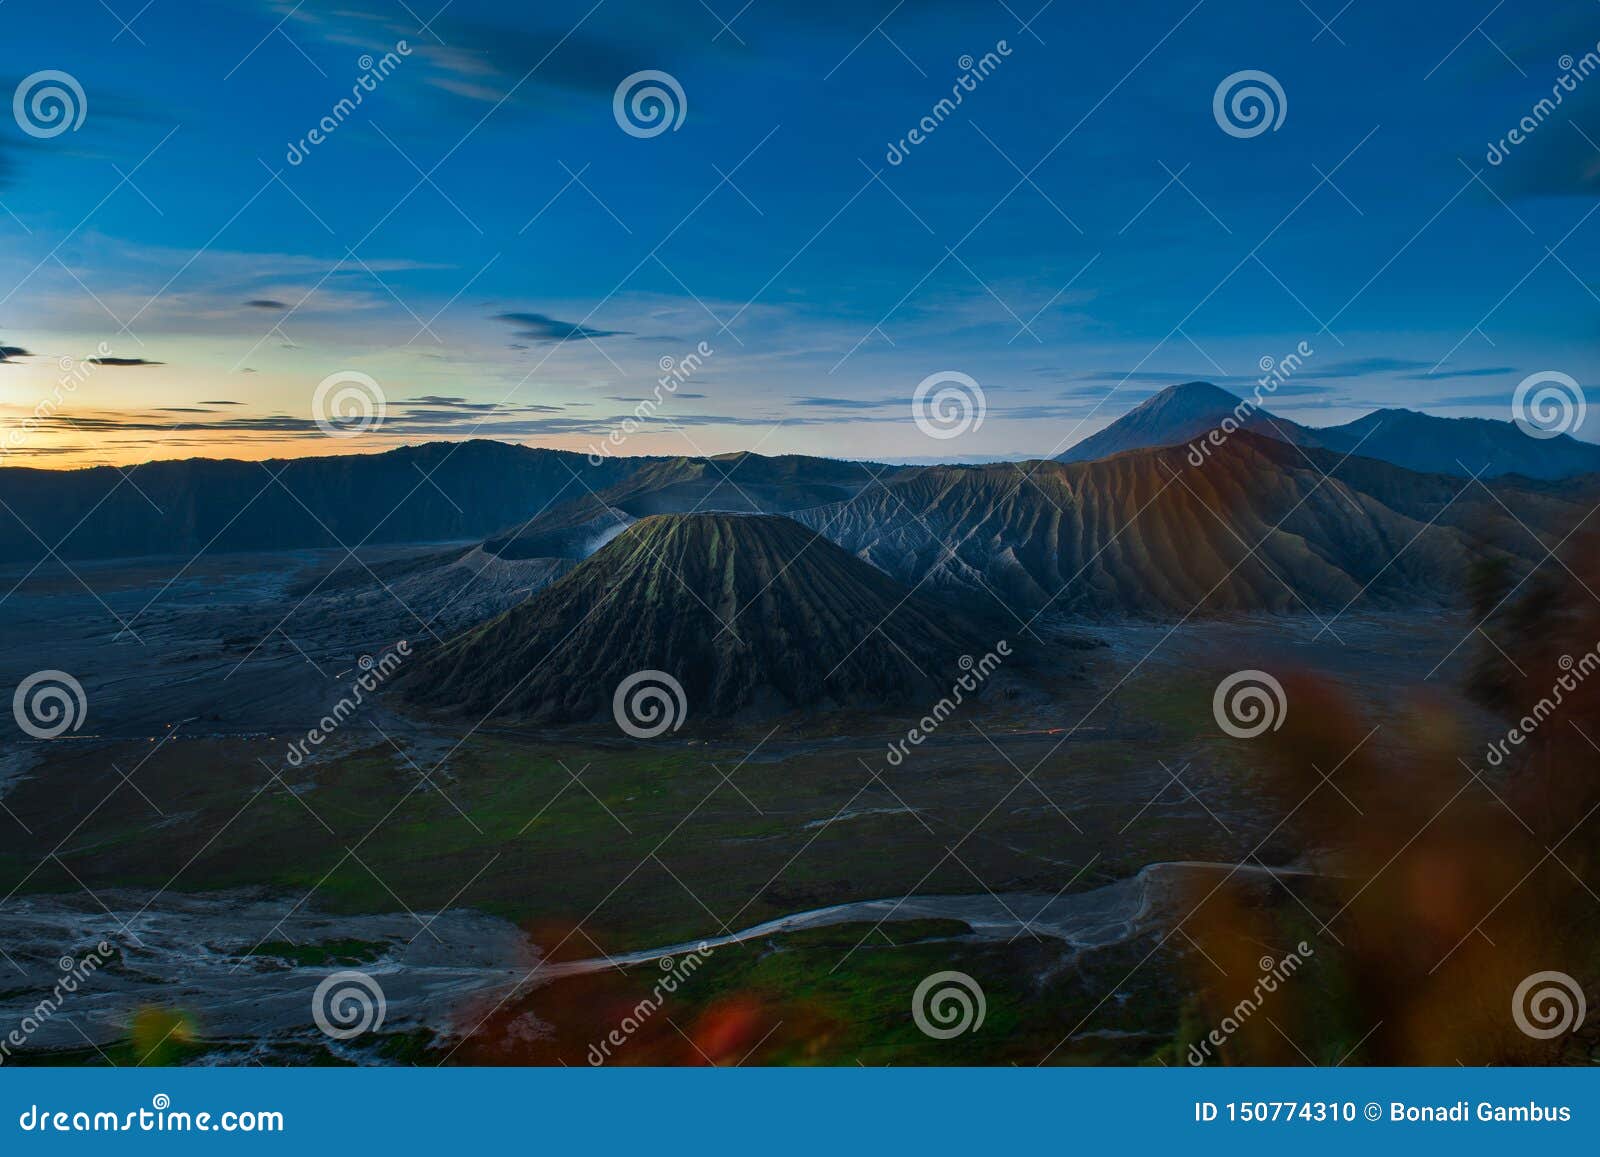 Sunrise At Love Hill With Mount Bromo And Gunung Batok View Stock Photo